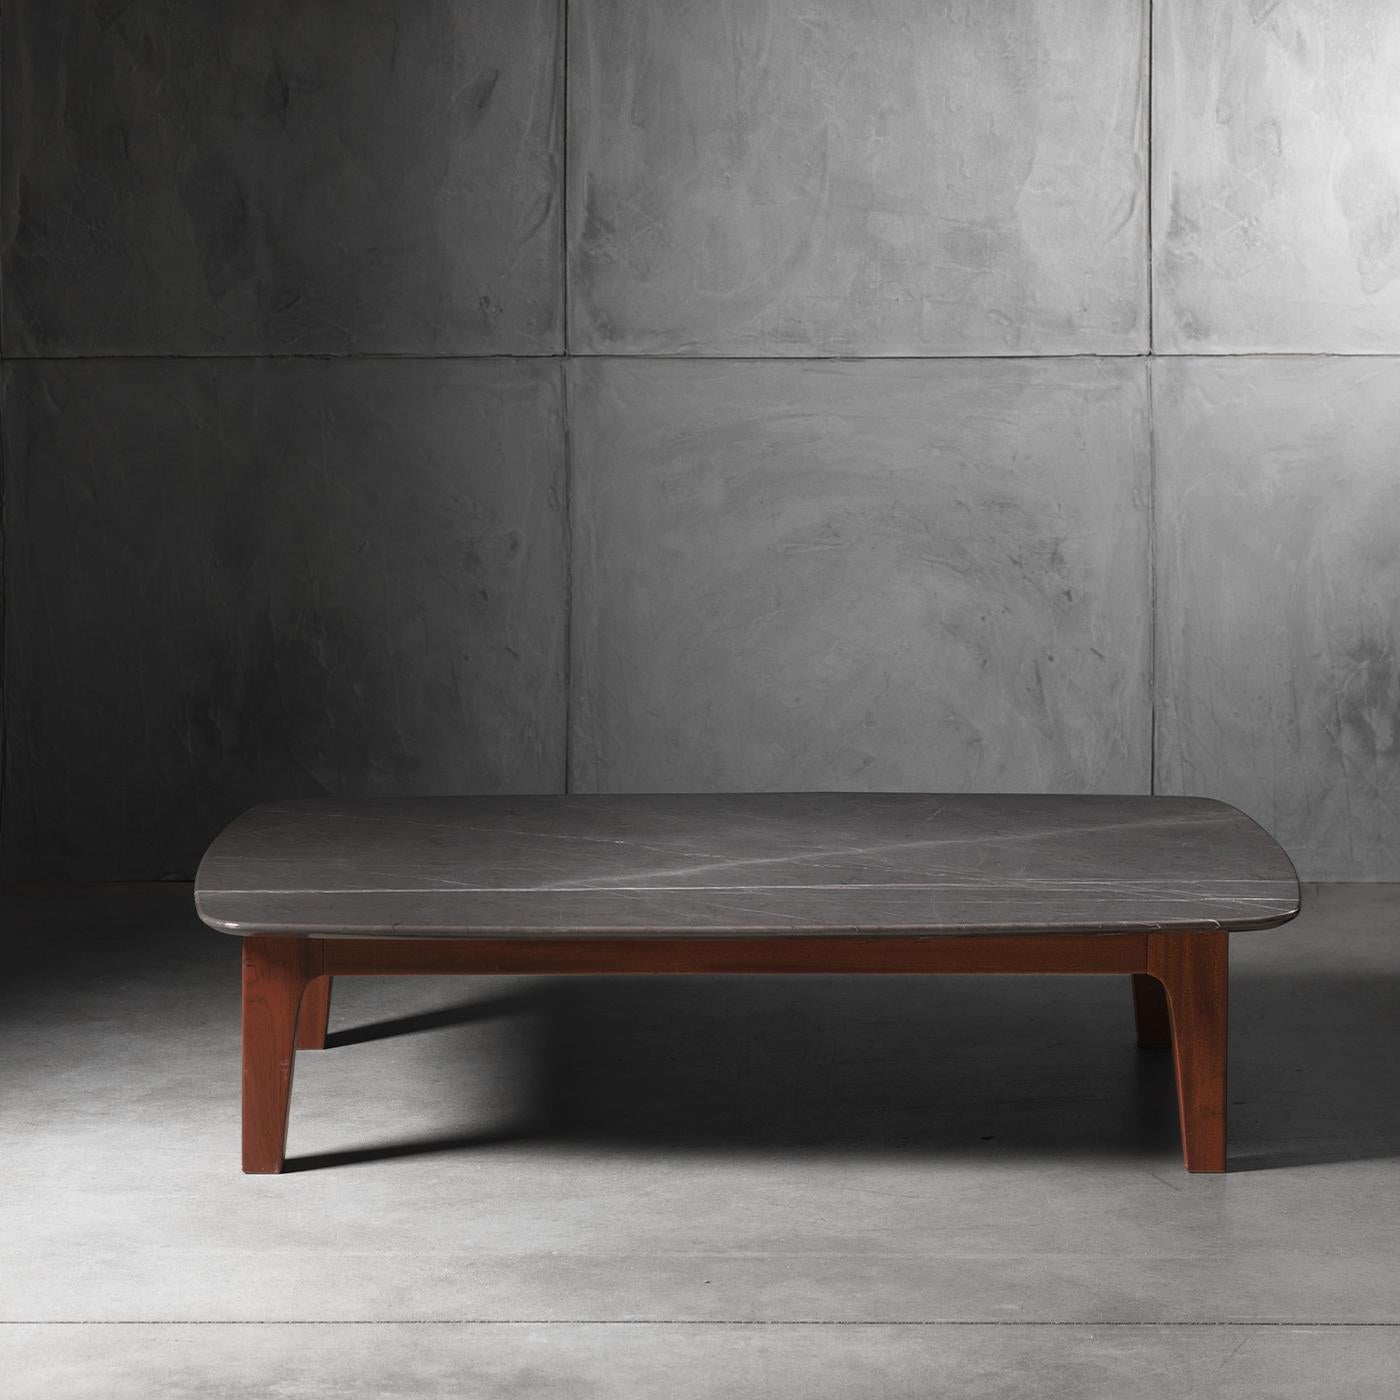 This low-sitting coffee table is part of the brand's Chelini Firenze collection that unites Made-in-Italy artisanal traditions with a modern look. Its sleek, minimalist silhouette is enhanced by a graphite top that sits upon Sipo Mahogany legs,